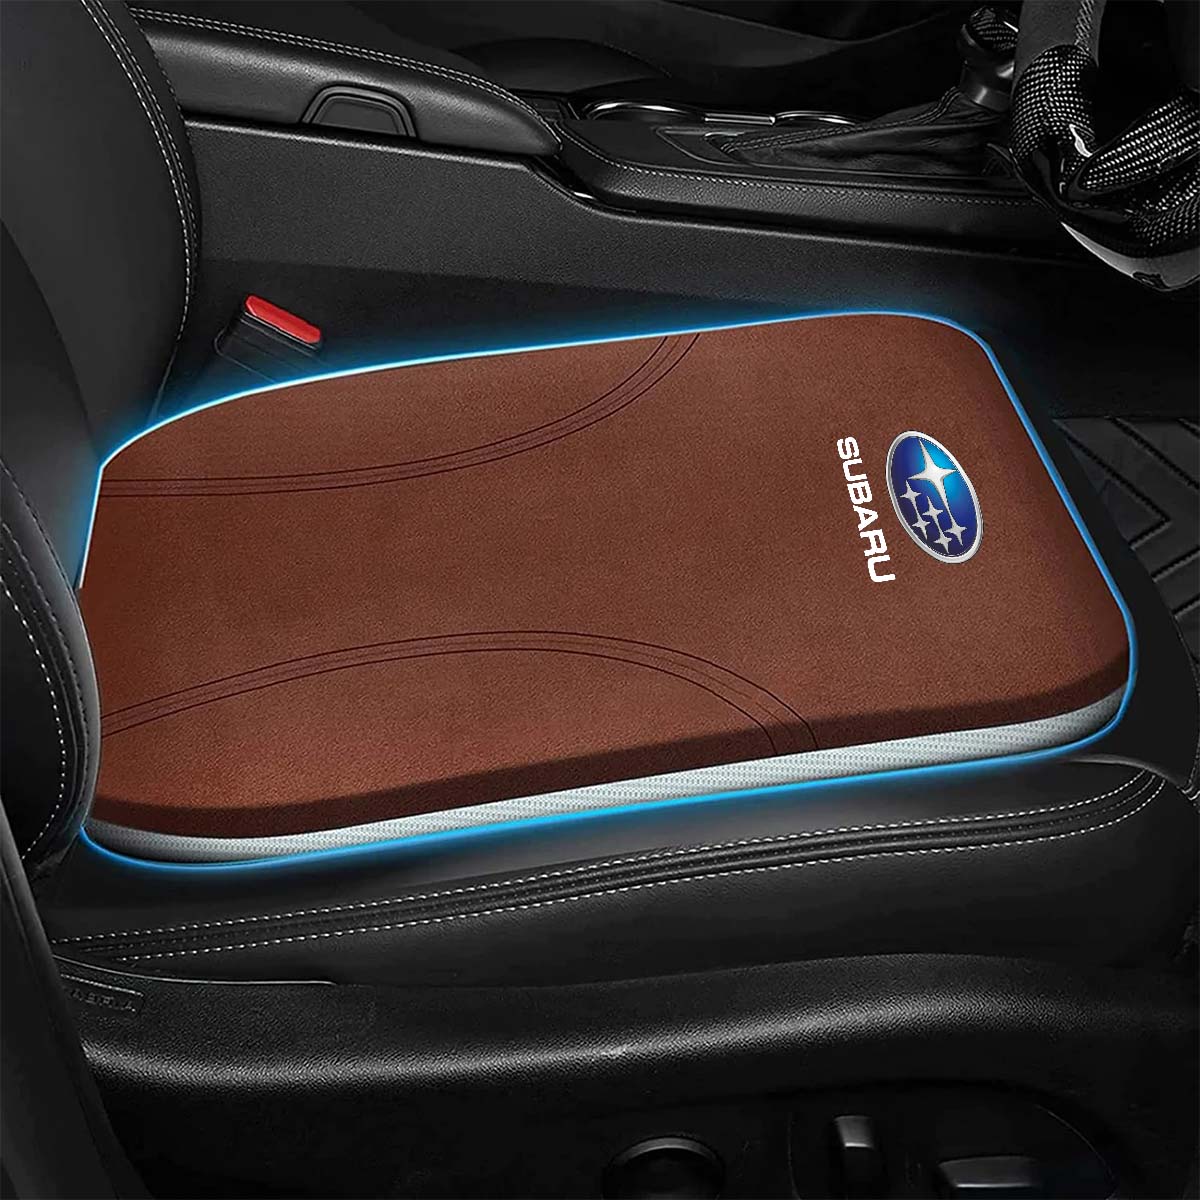 Subaru Car Seat Cushion: Enhance Comfort and Support for Your Drive